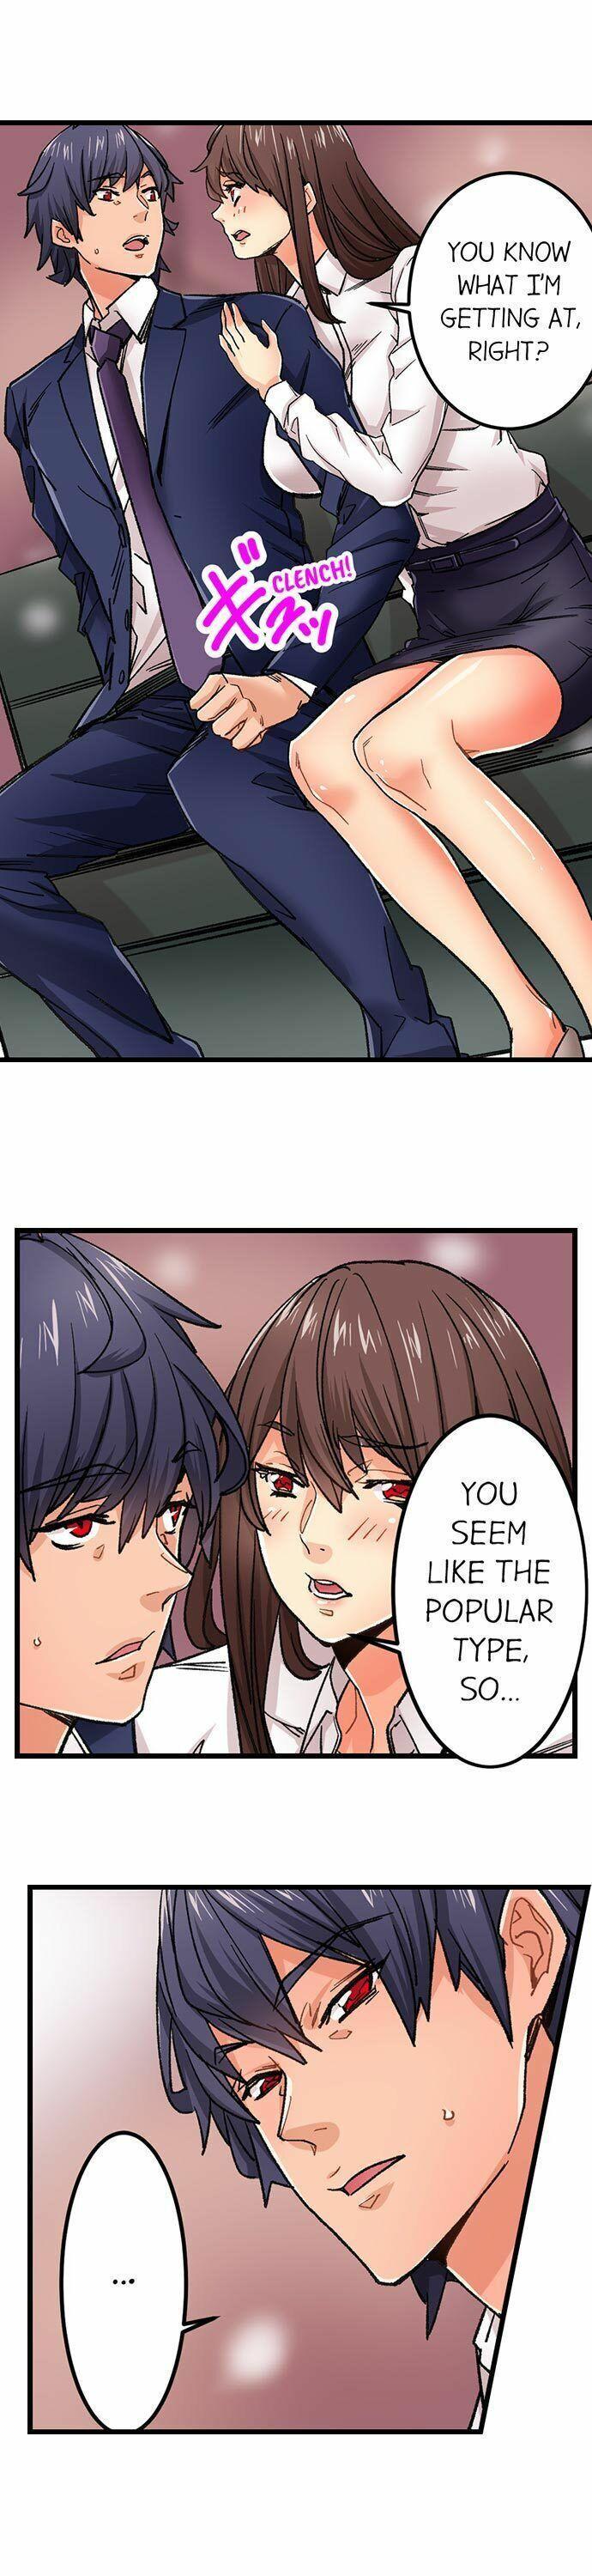 [OUMA] Just the Tip Inside is Not Sex Ch.36/36 [English] Completed 514